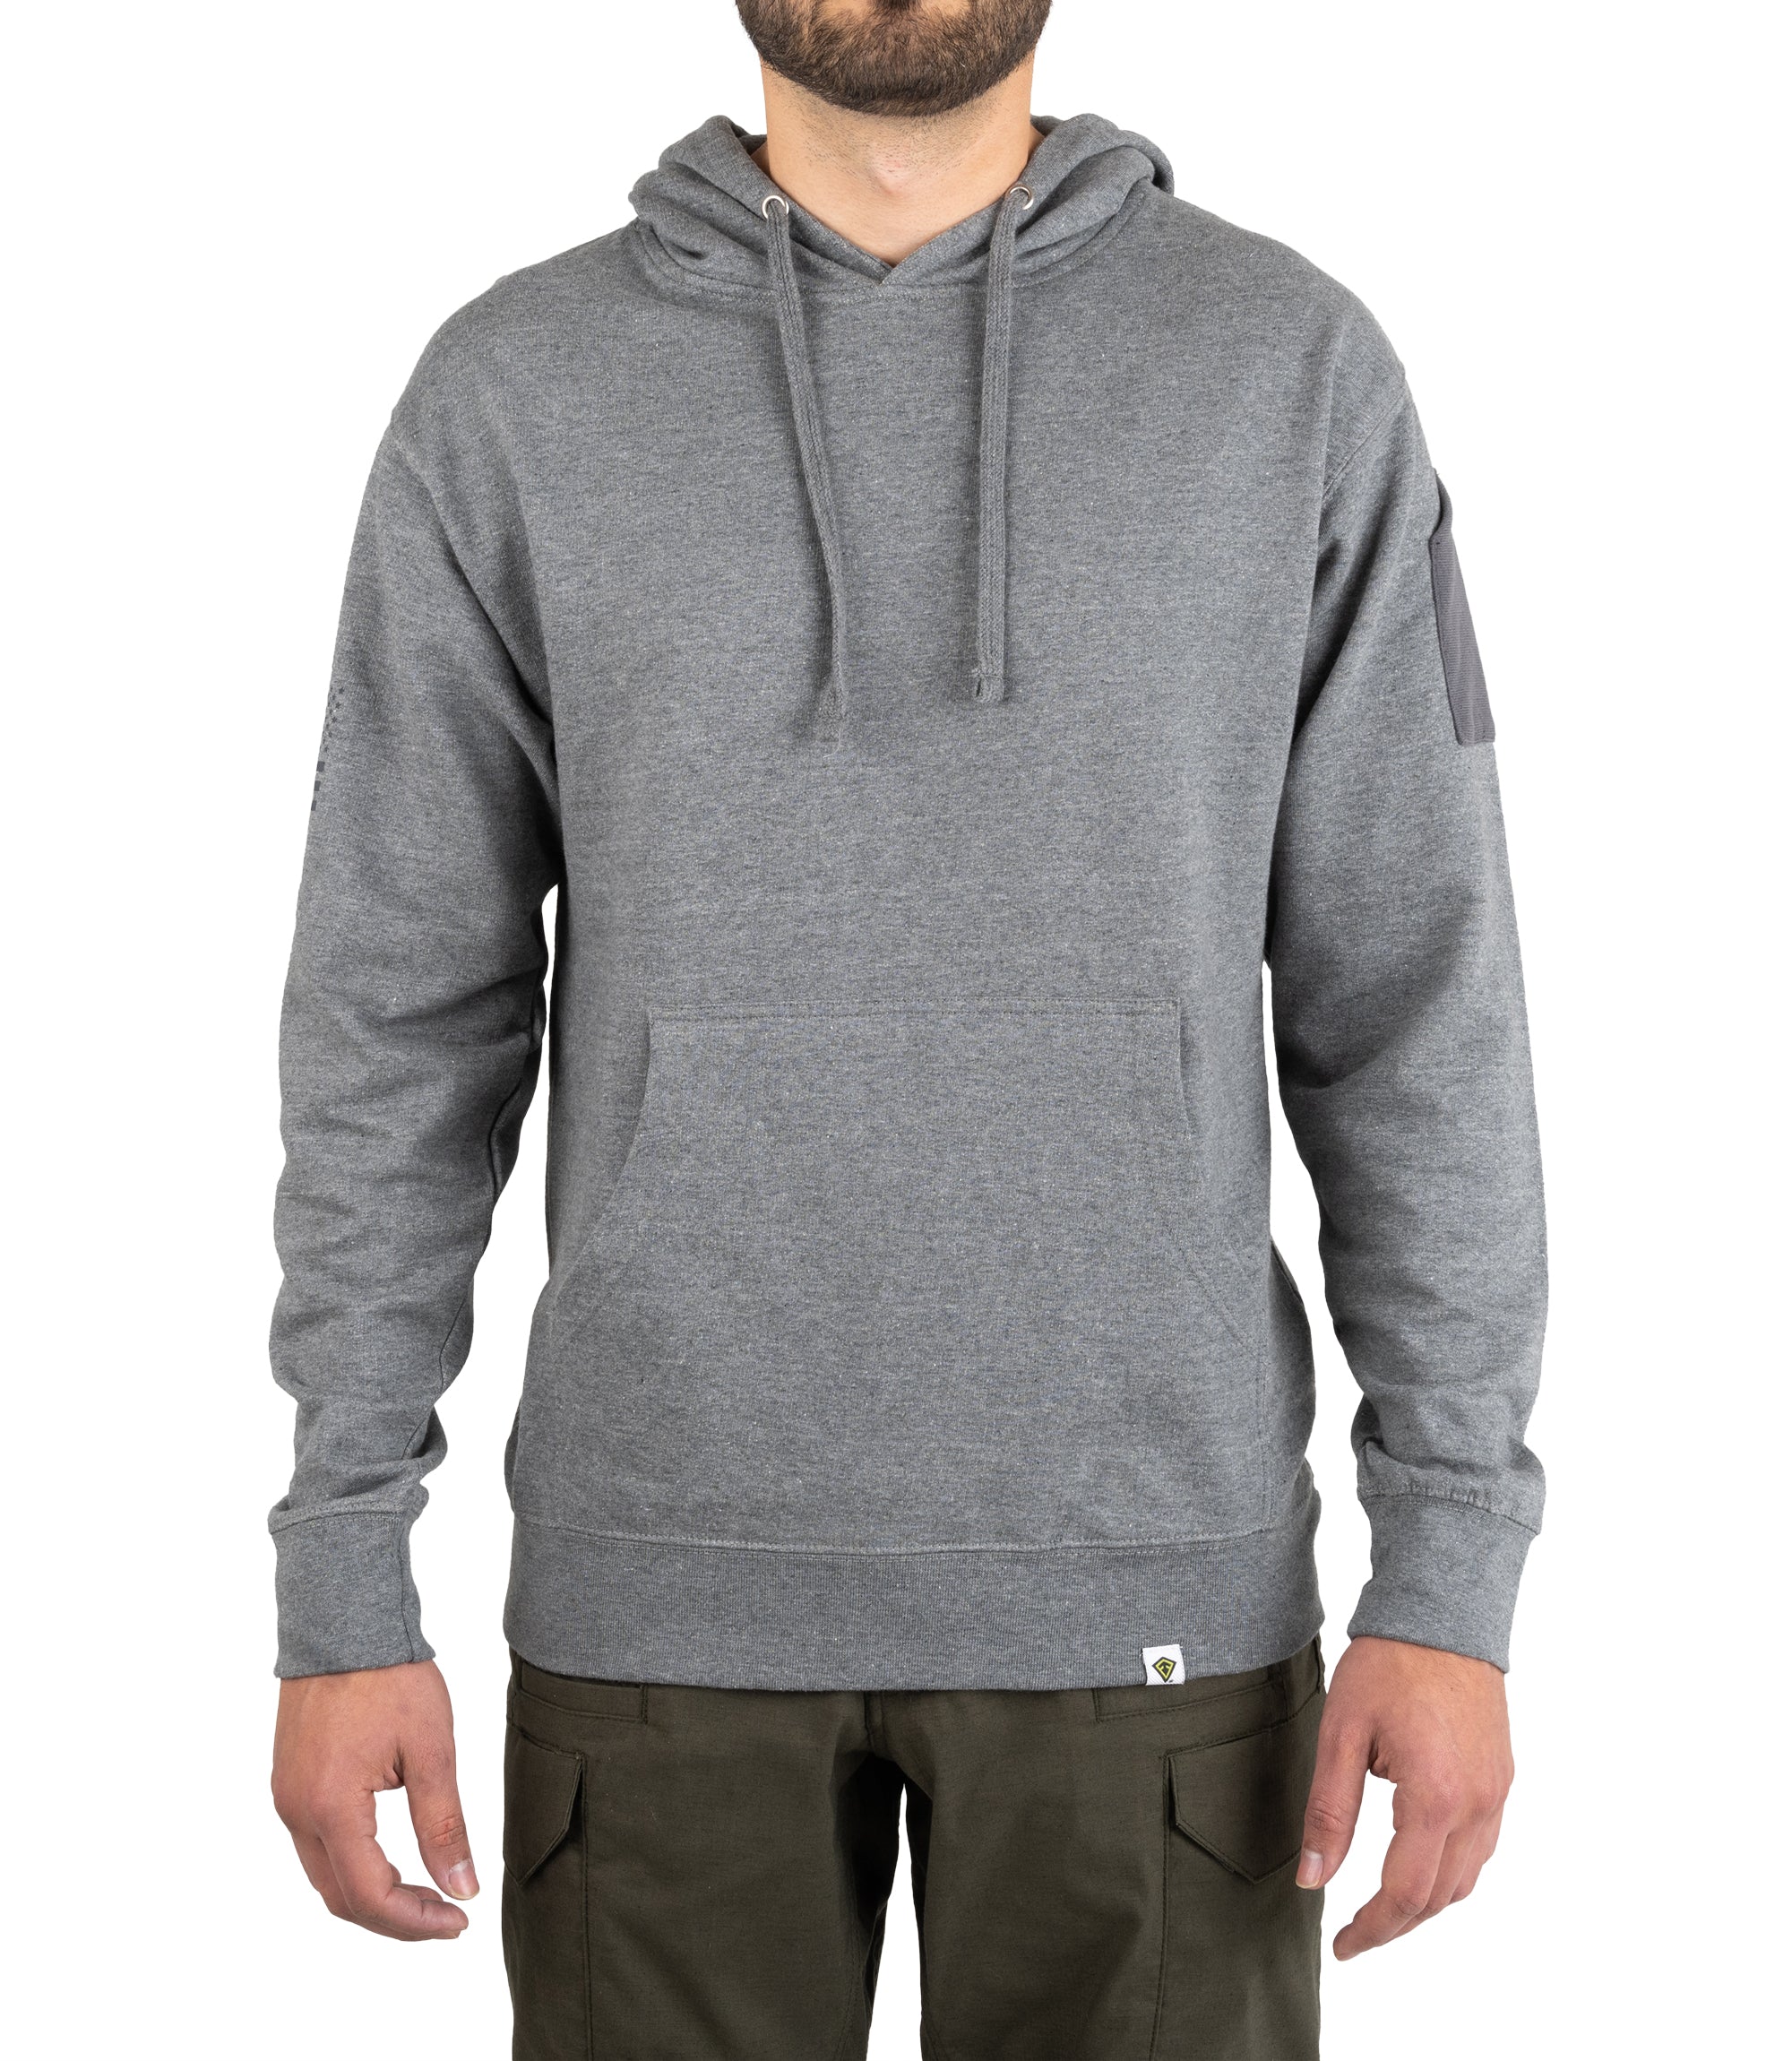 Slim Fit Tactical Hoodie With Mask Casual Gym Top From Joeydorsey